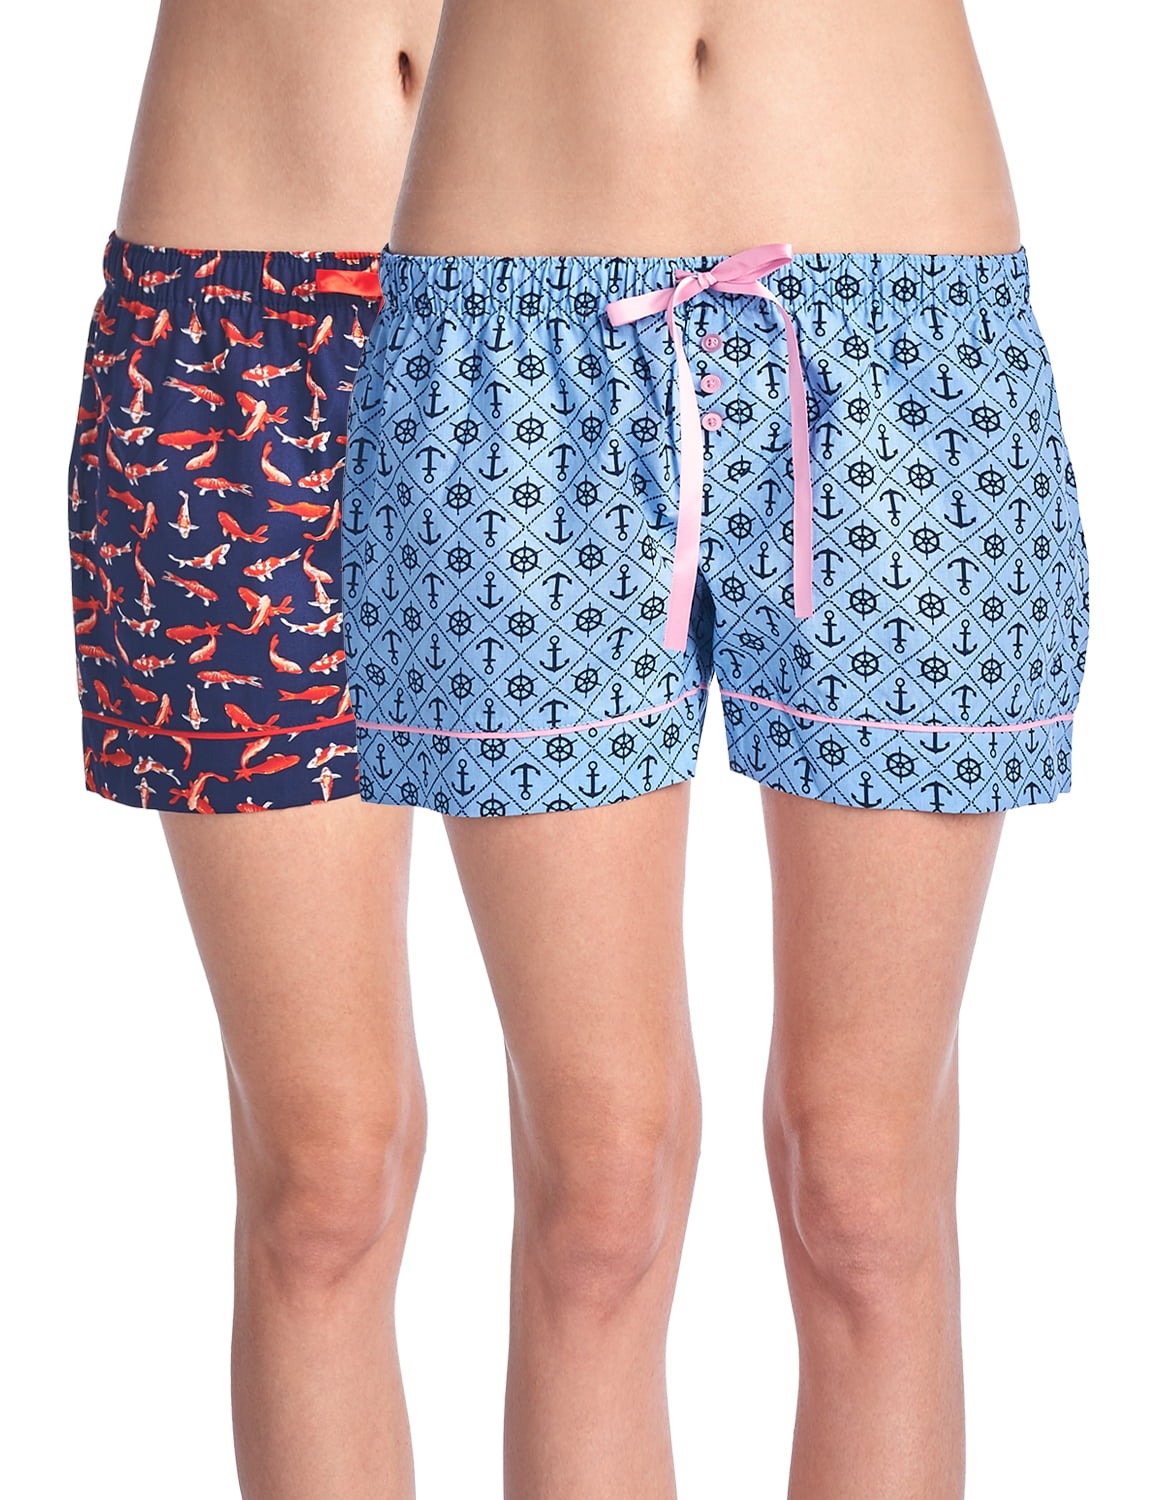 Casual Nights - Casual Nights Women's 2 Pack Cotton Woven Lounge Boxer ...